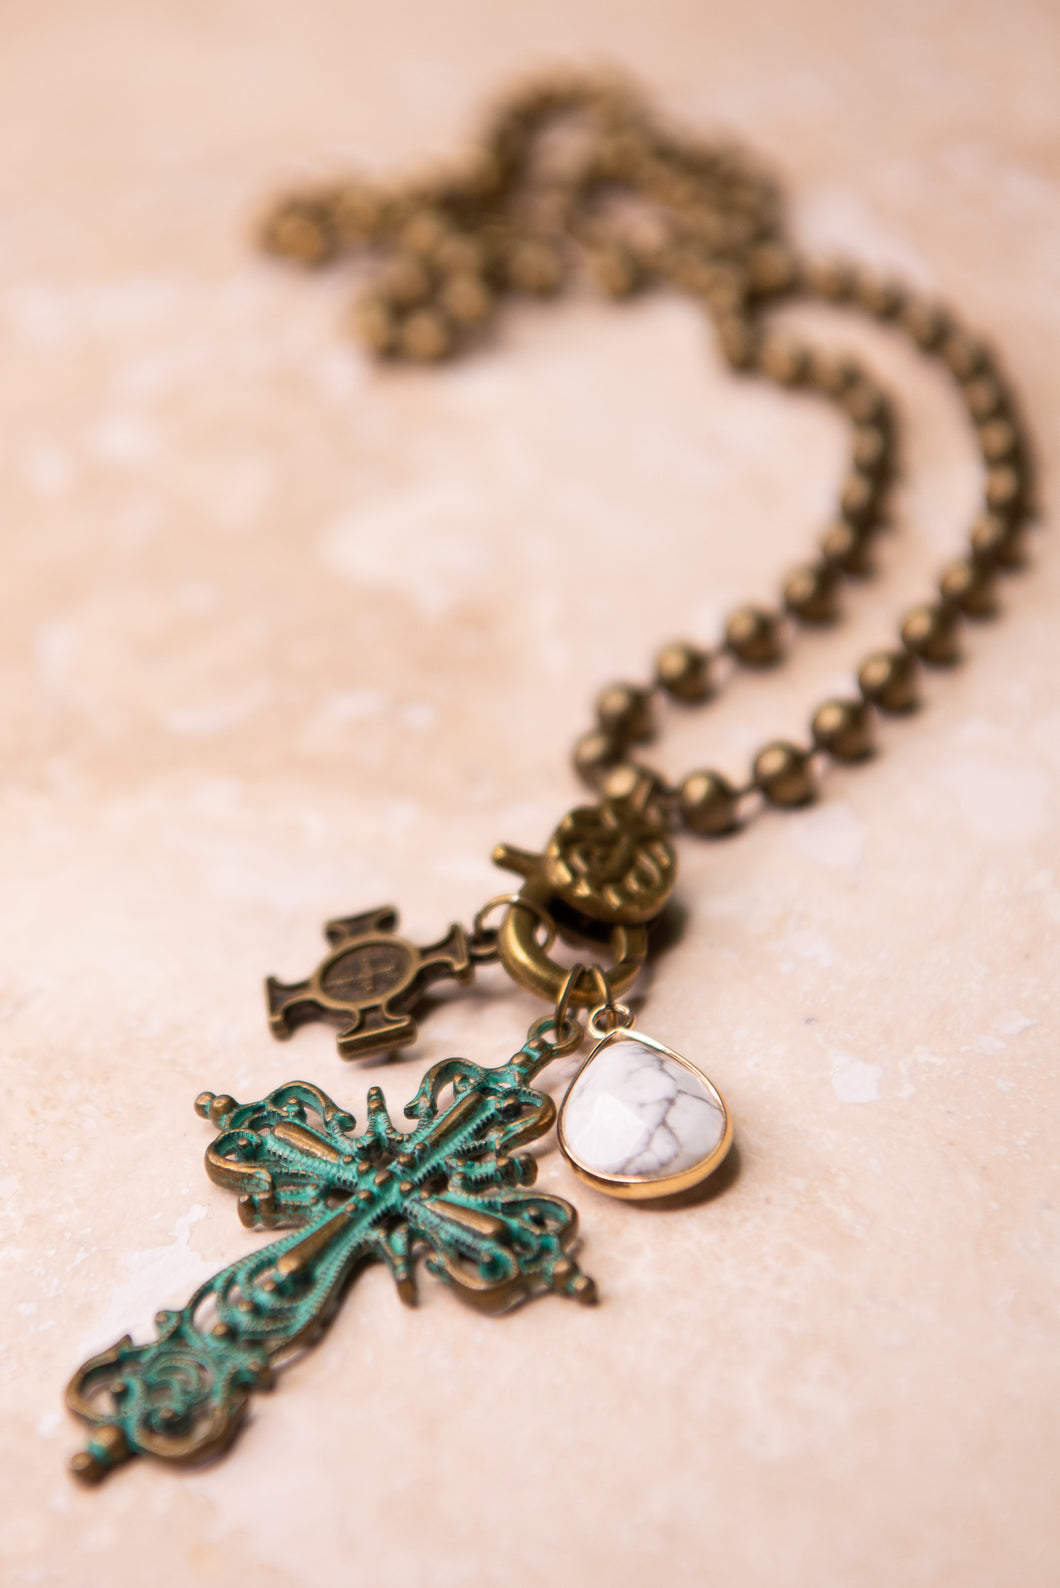 Ball Chain Cross Necklace